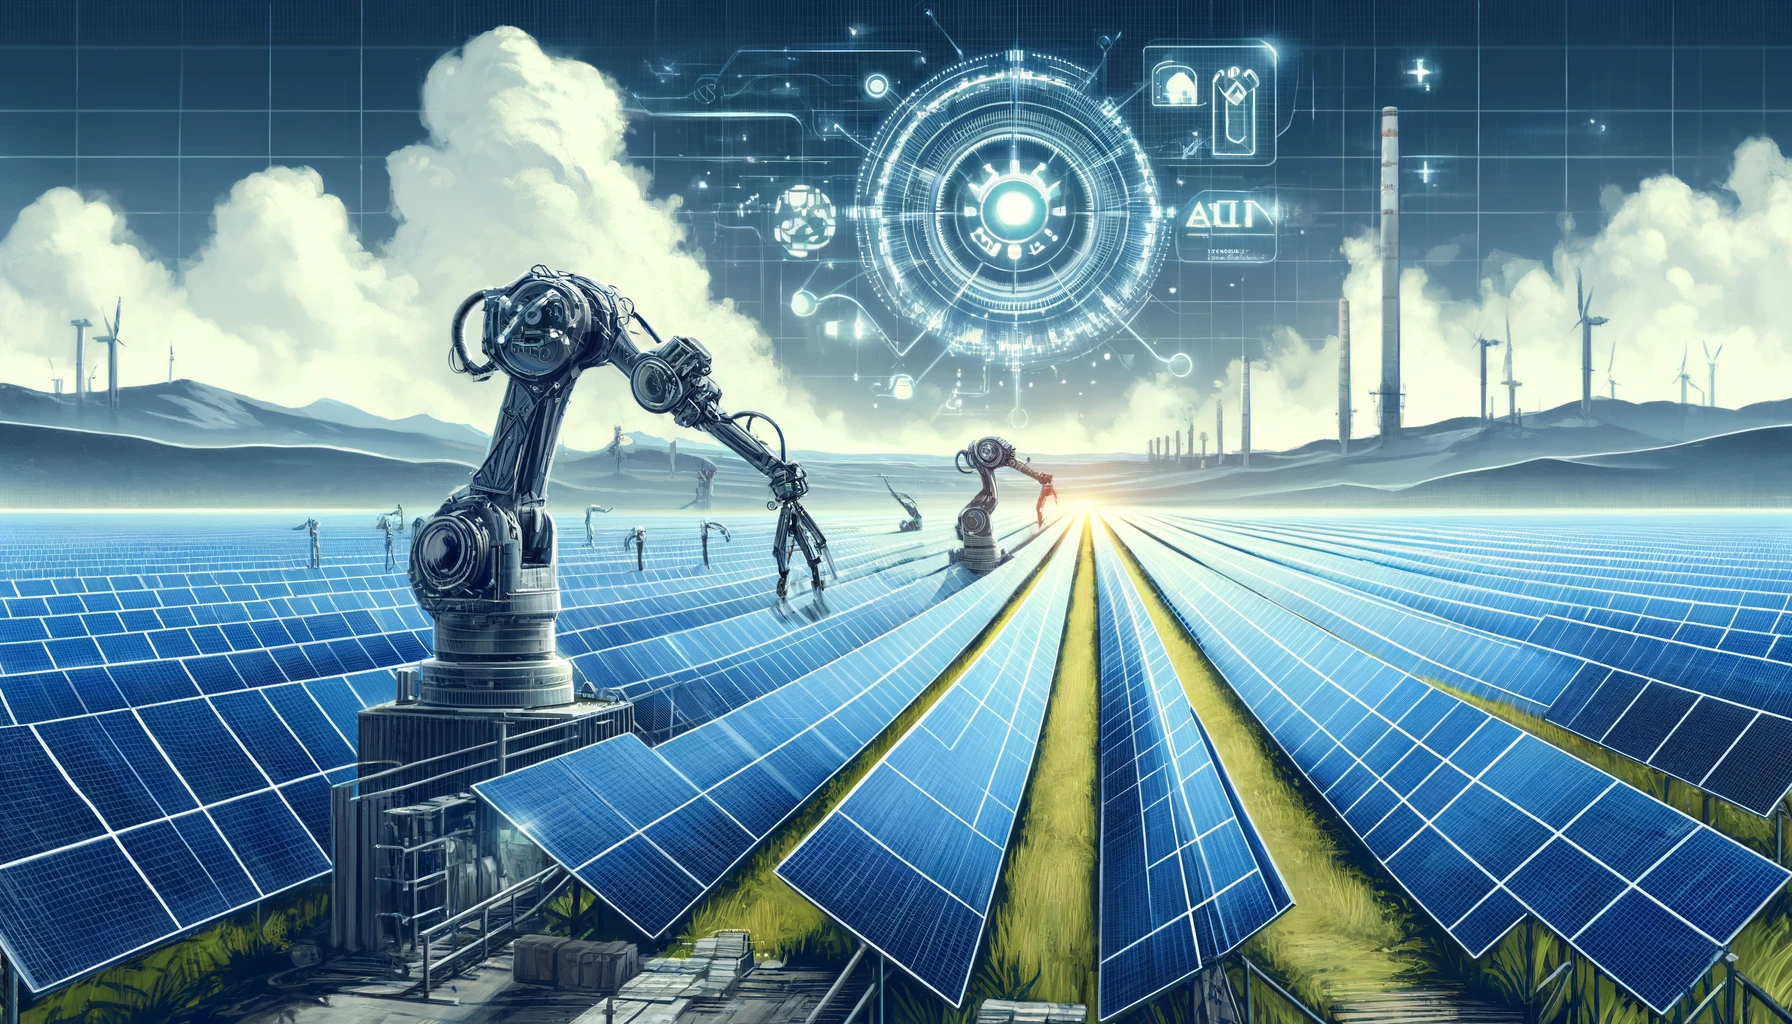 The illustration for the article on the renewable energy company's use of AI in solar panel alignment